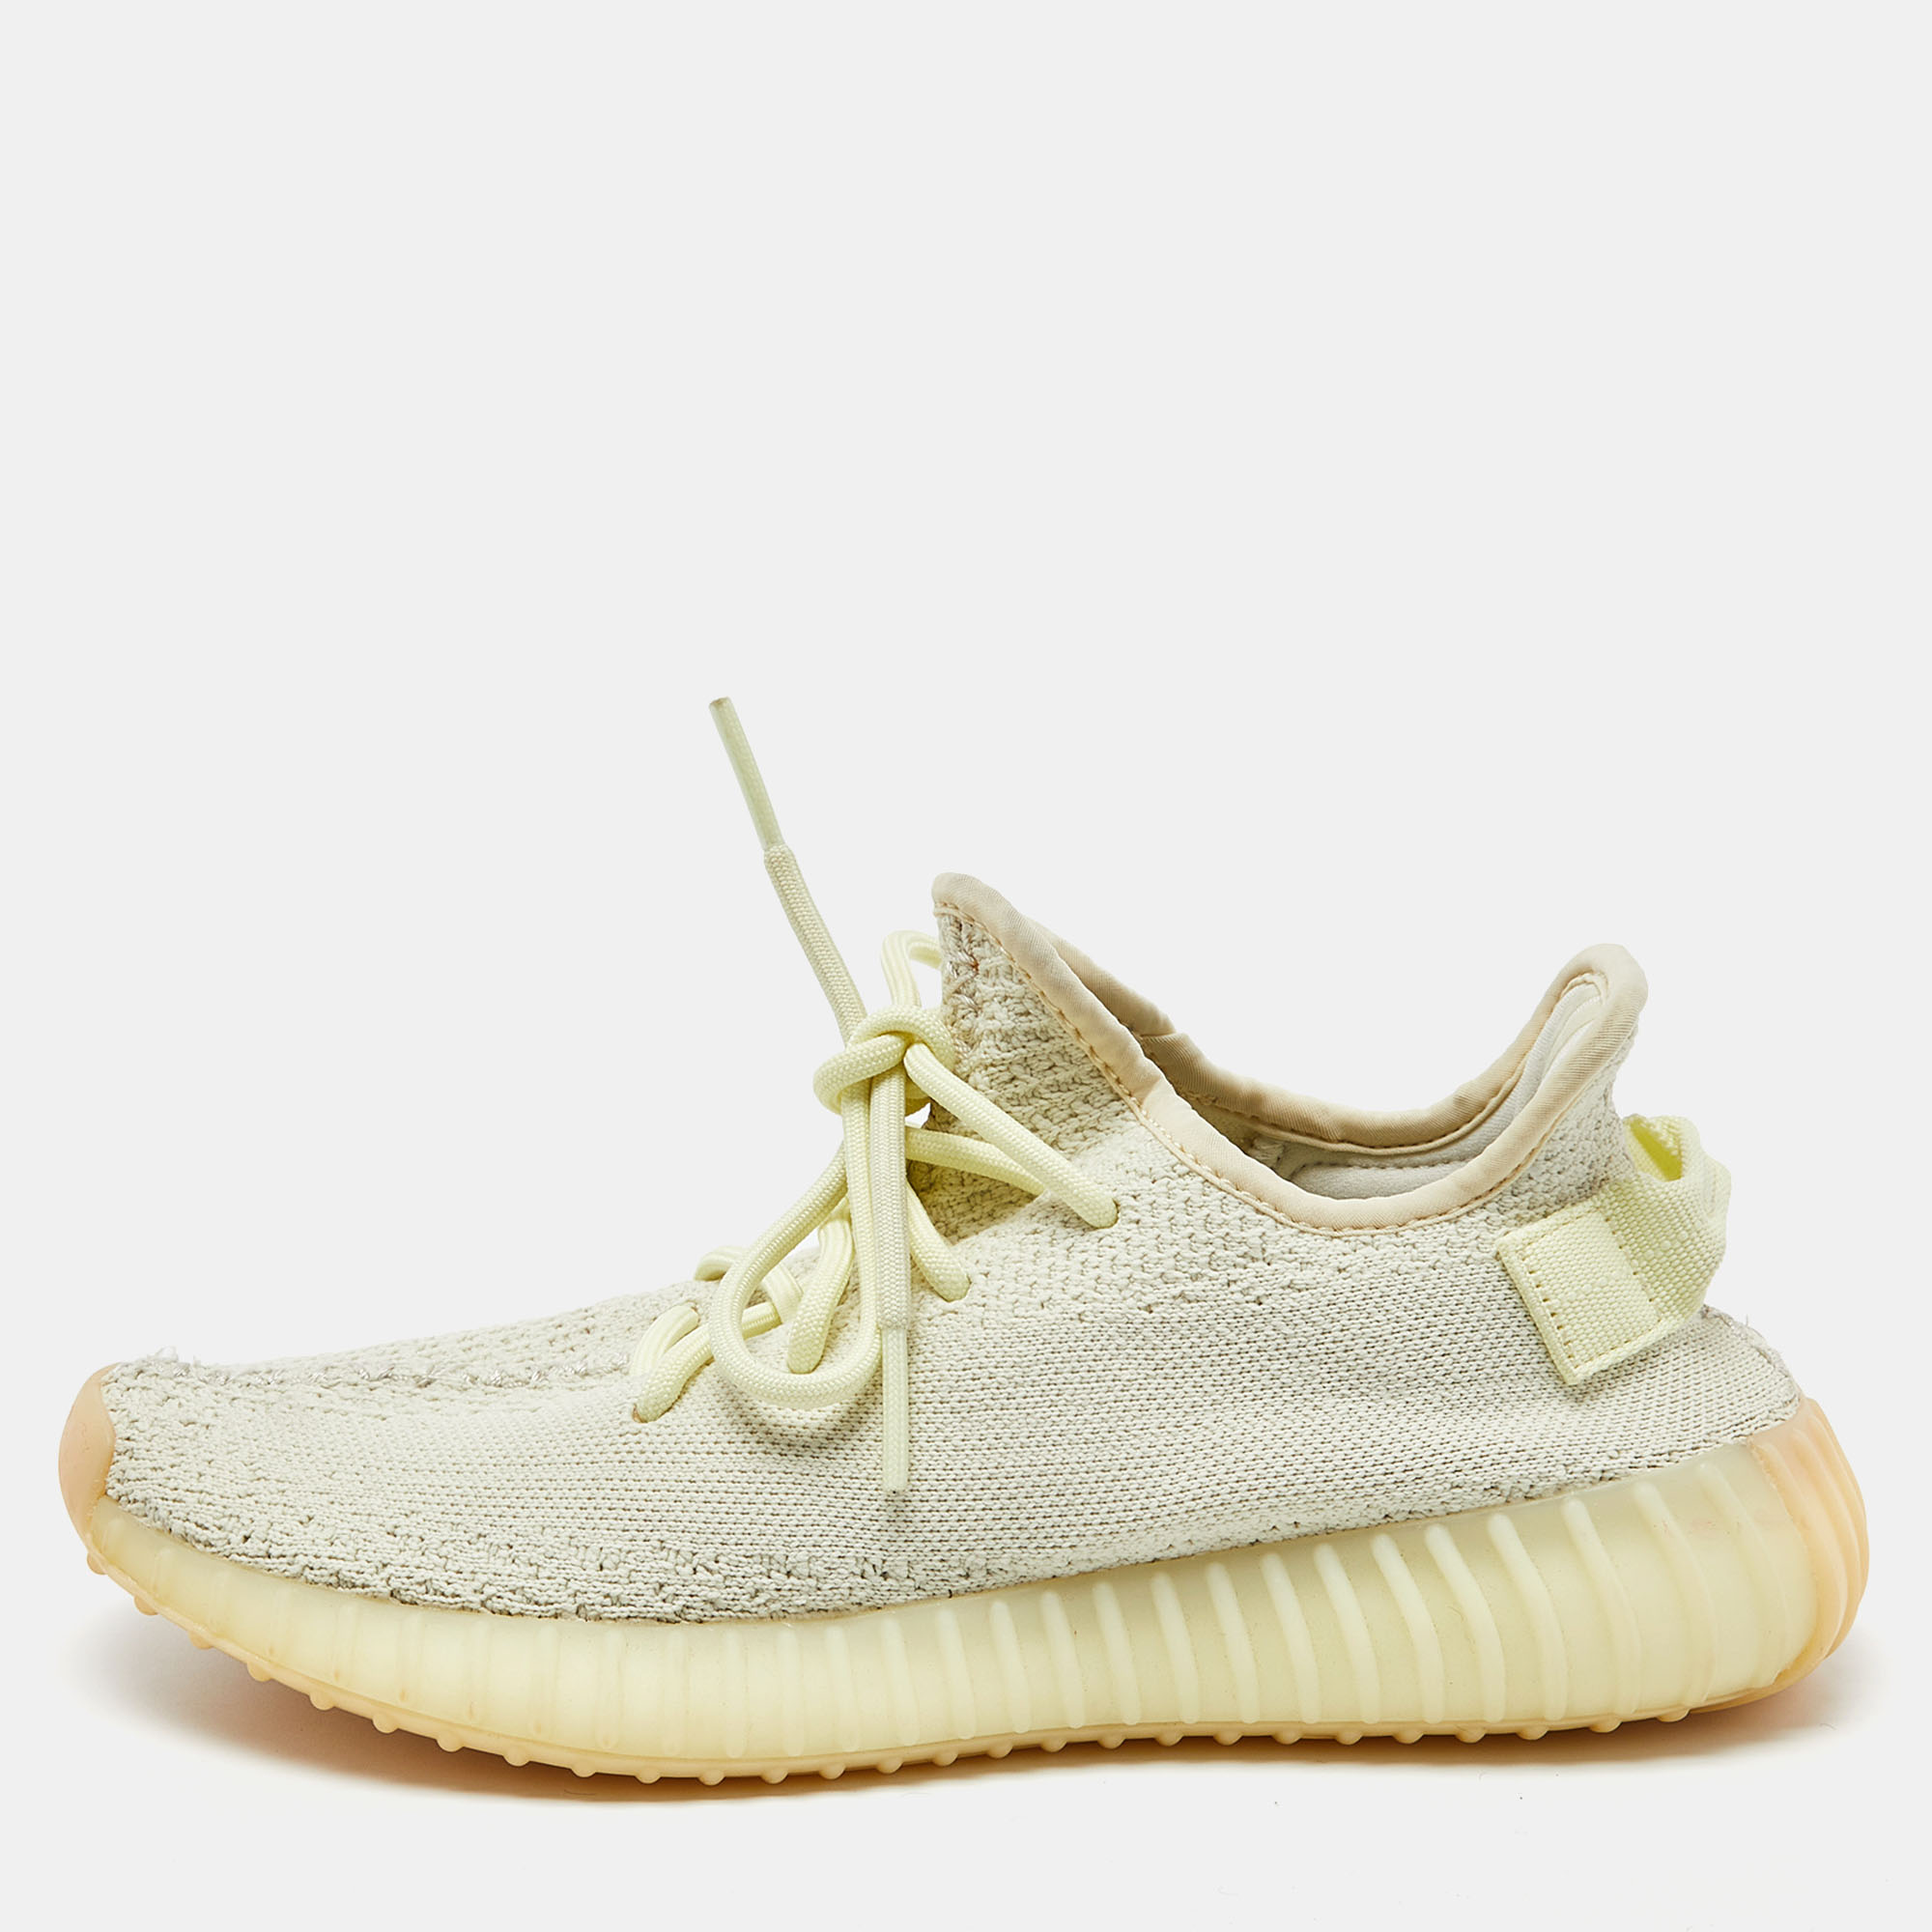 Yeezy X Adidas Green Knit Fabric Boost 350 V2 Butter Sneakers Size 39 1/3